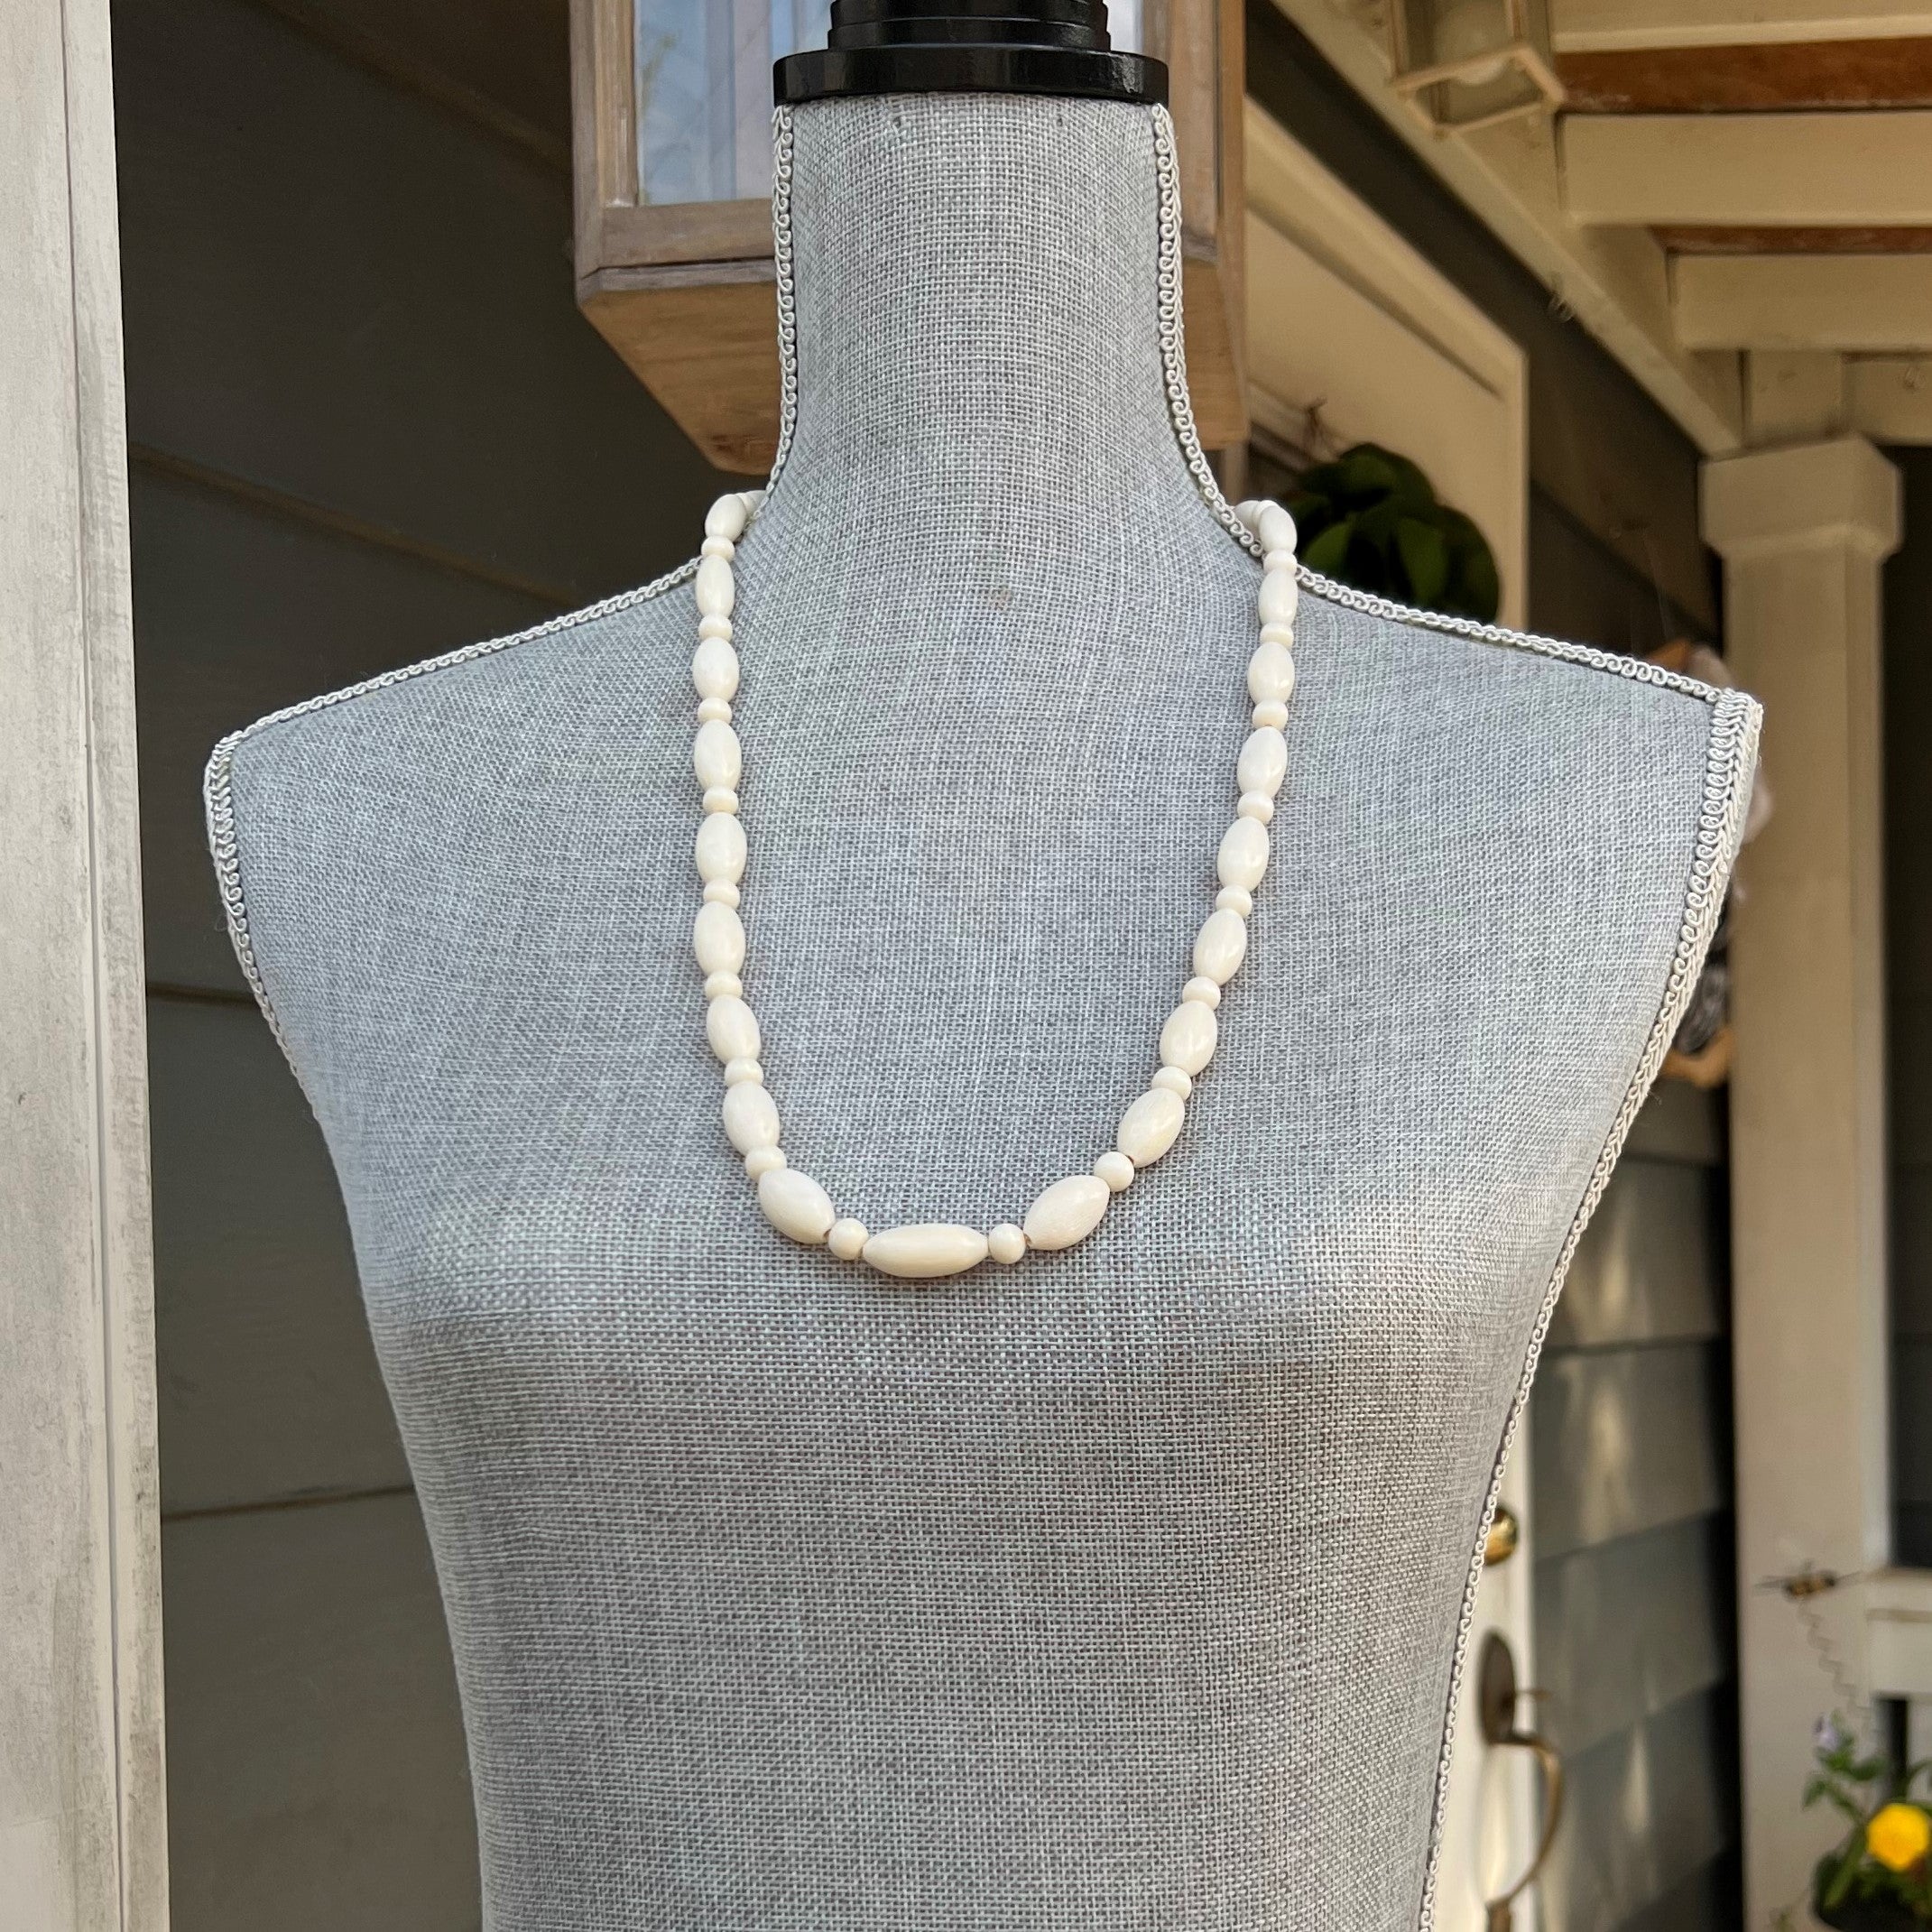 This luxurious necklace is handcrafted with camel bone beads. The beads alternate between oblong and round shapes giving the necklace a unique look. The sophisticated materials make this necklace an exquisite addition to any wardrobe. The approximate length is 28".